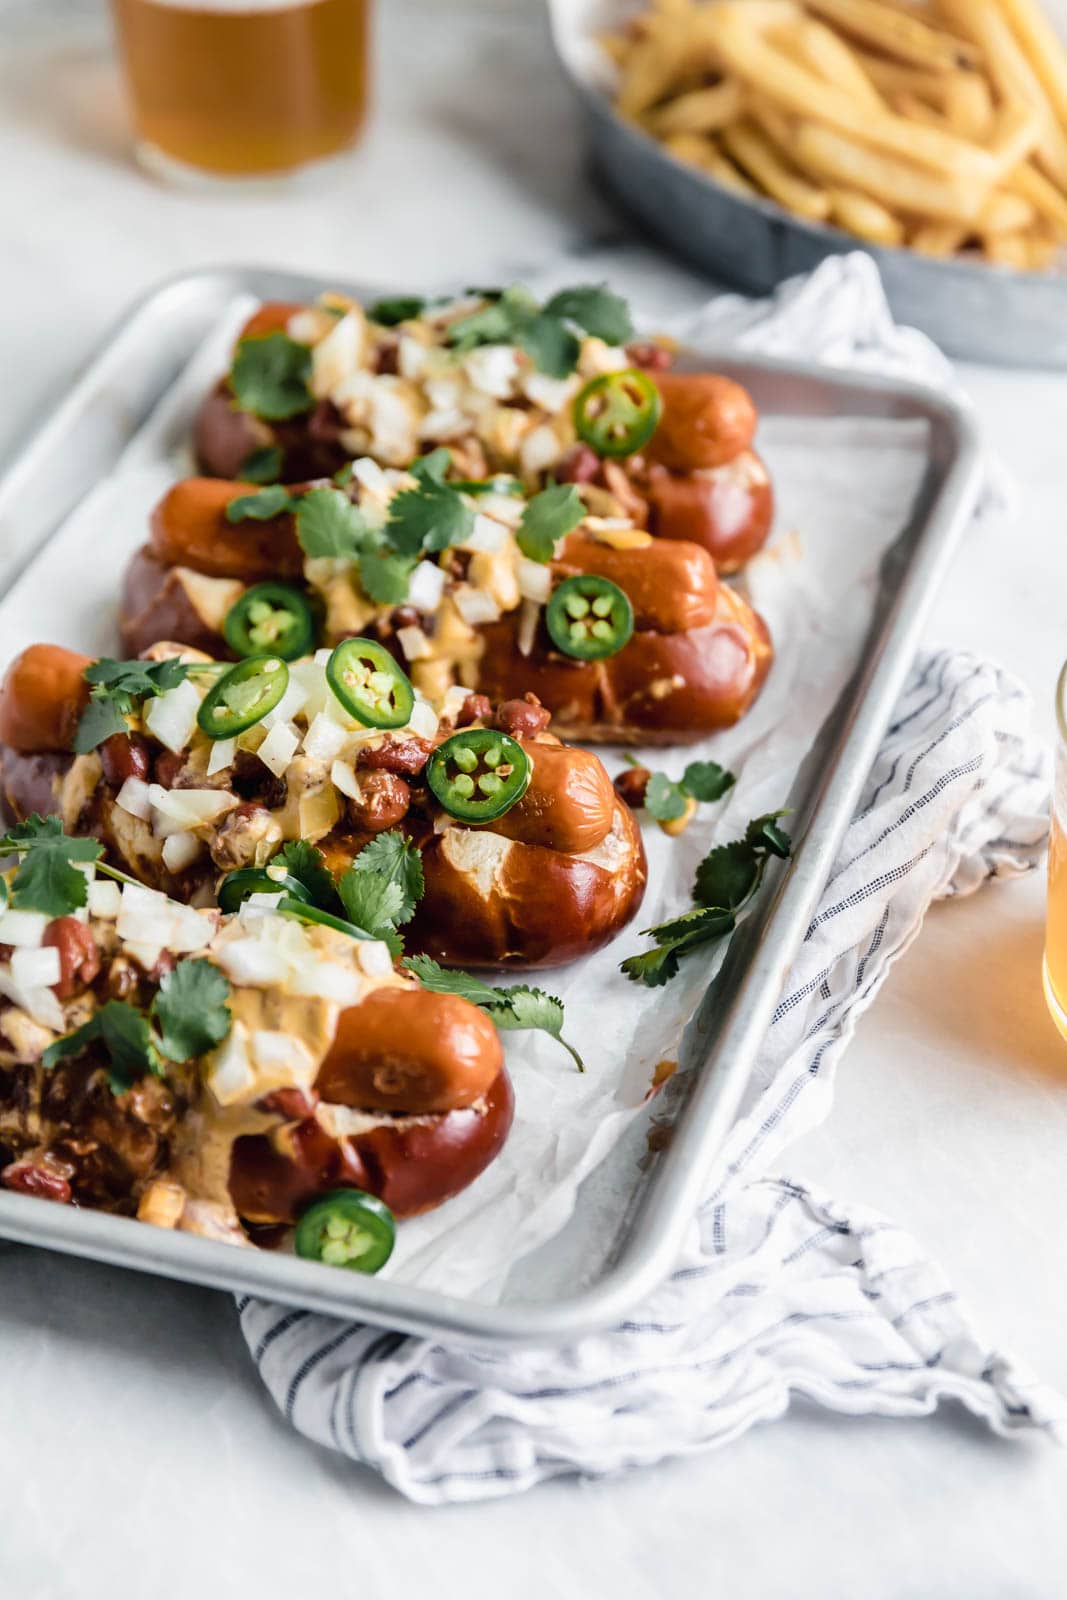 Vegan Chili Cheese Dogs with a creamy cashew queso so good even the most discerning meat-eaters will be impressed.